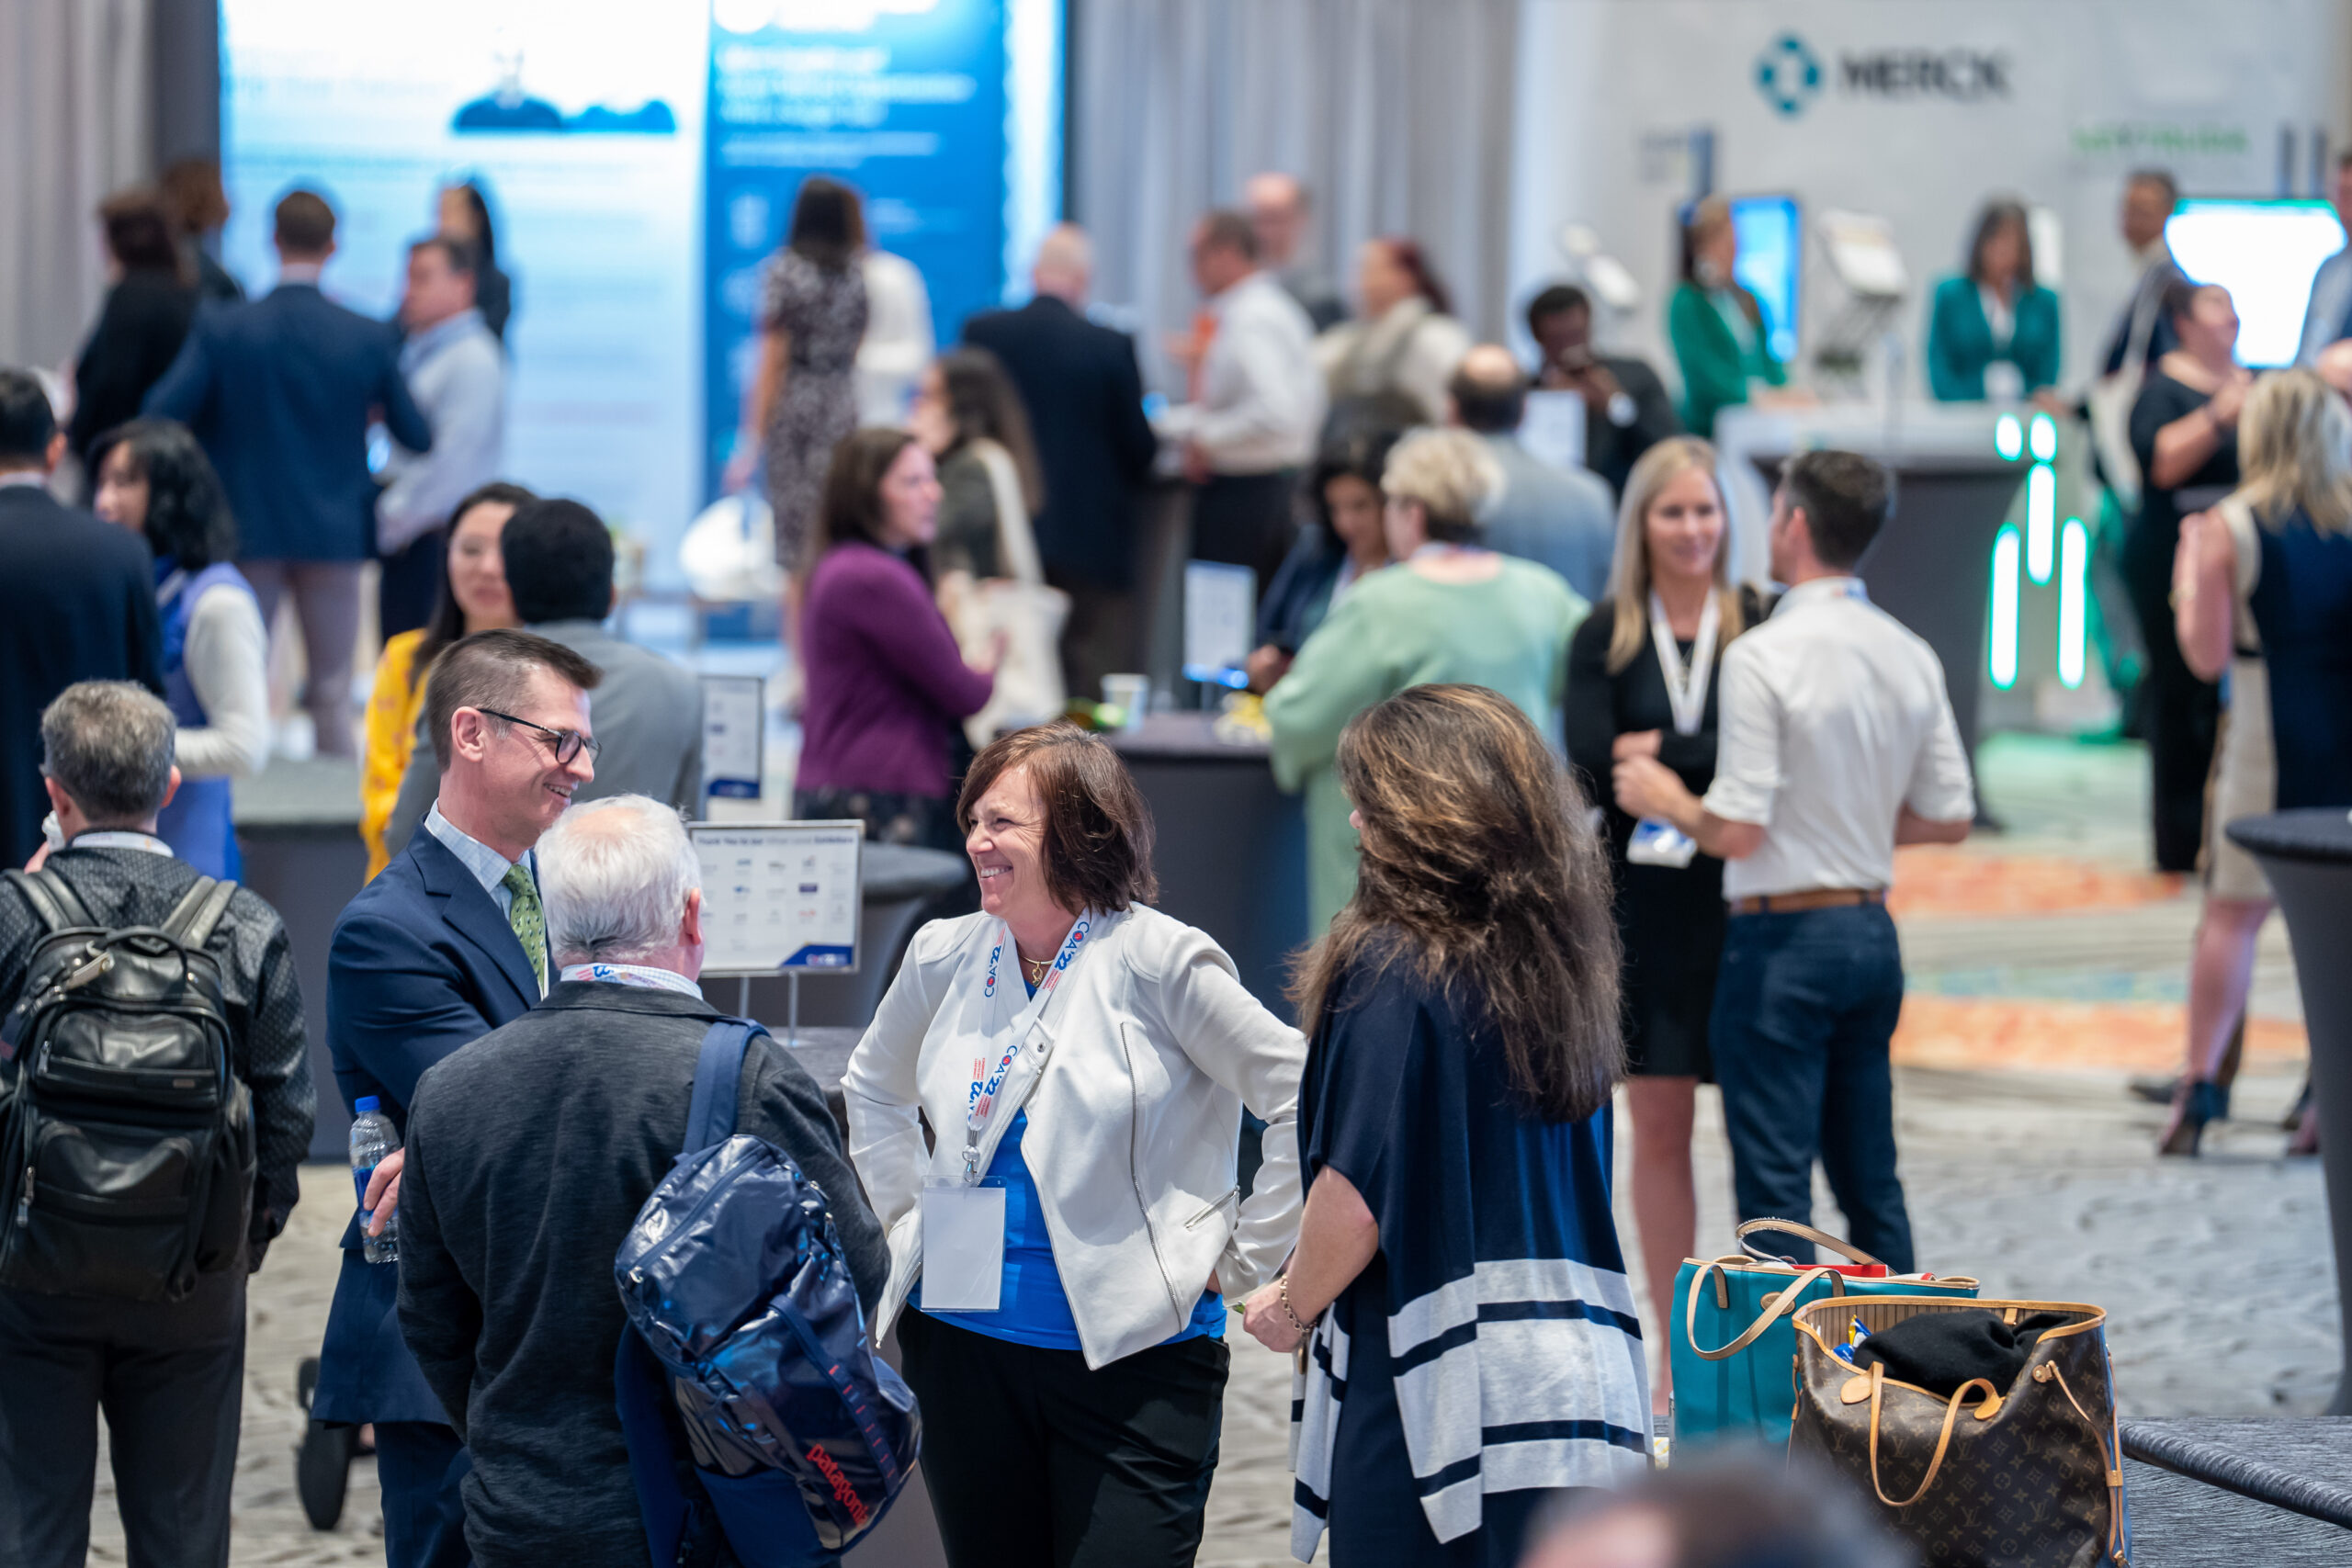 Be an Exhibitor at the Community Oncology Conference